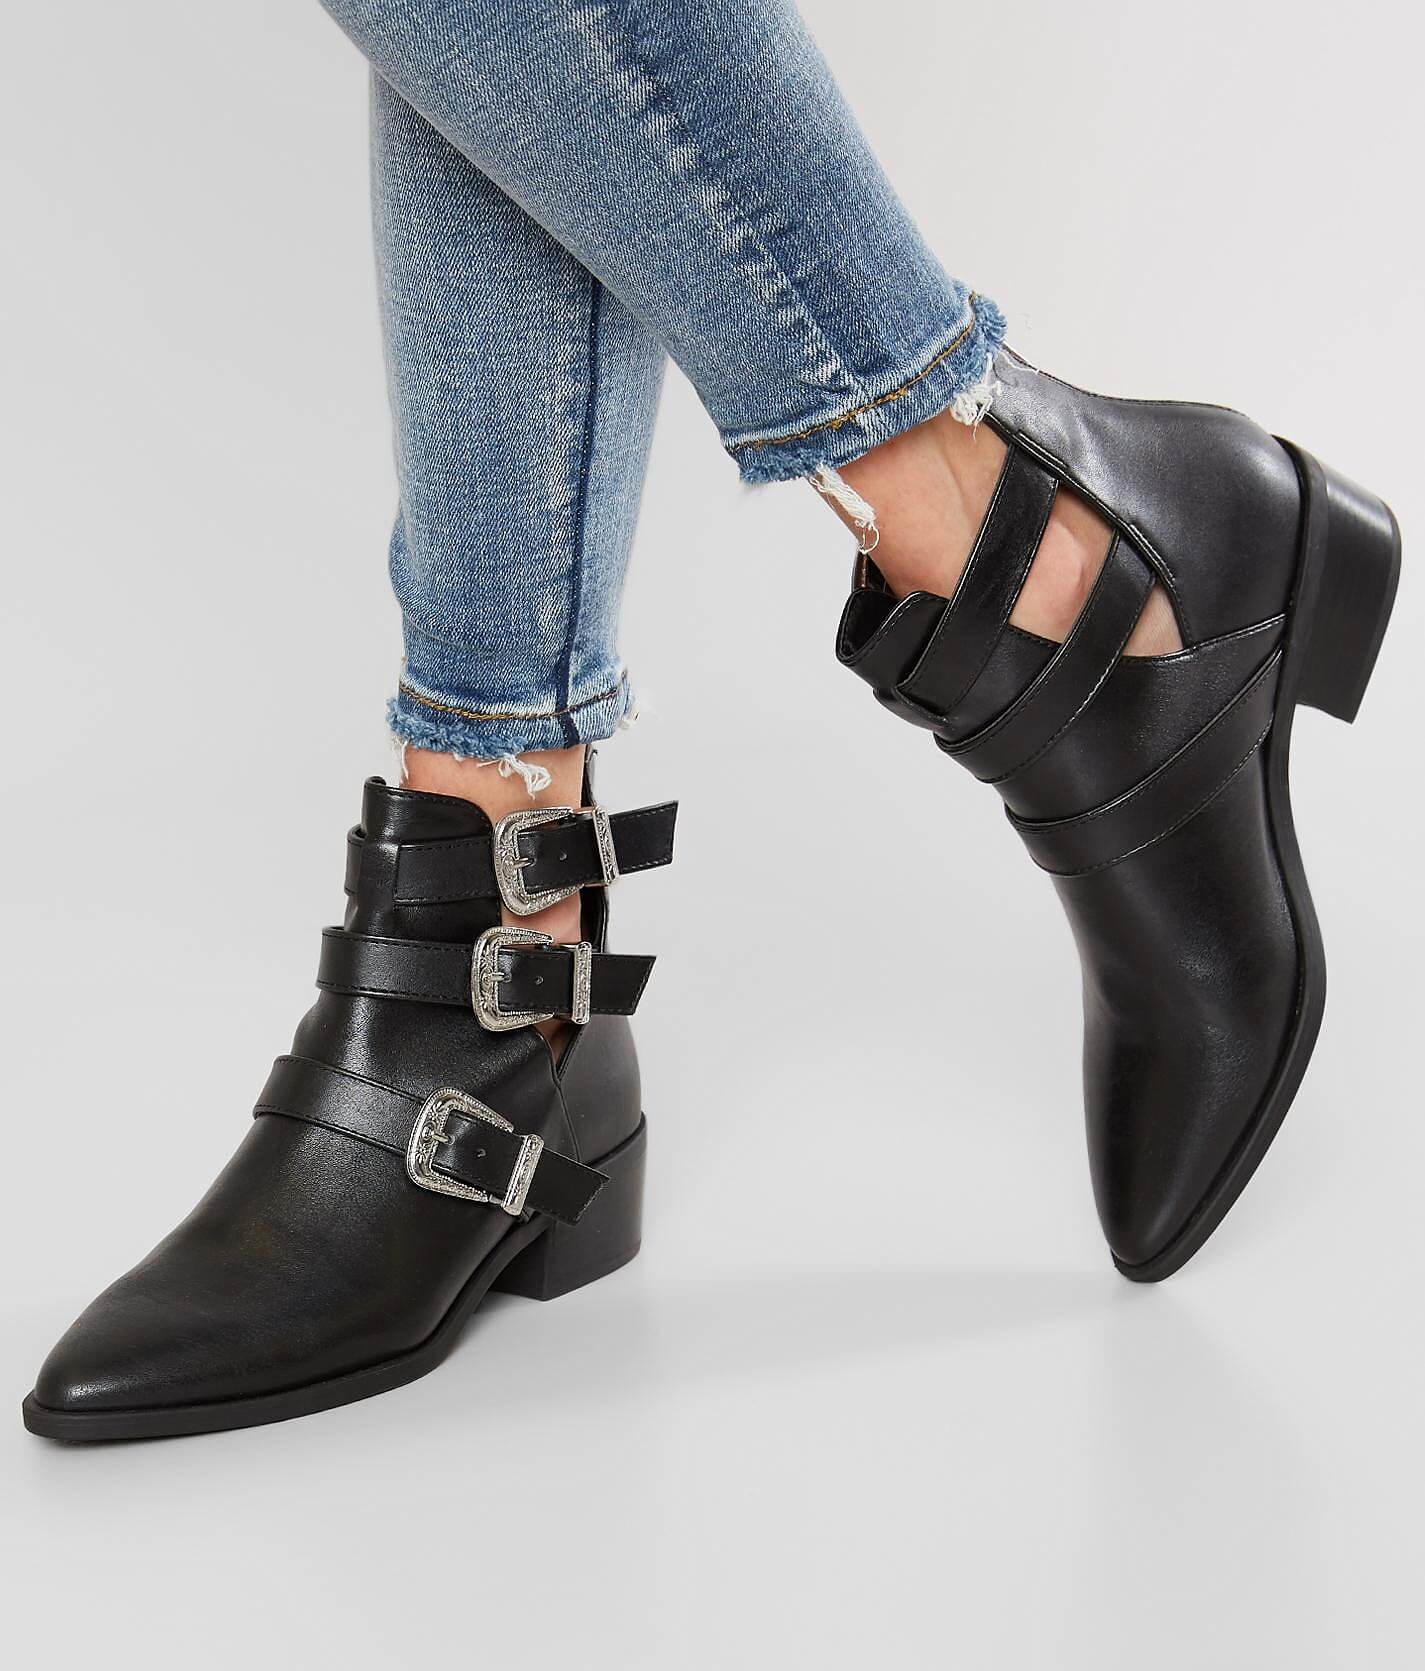 Madden Girl Cecily Ankle Boot - Women's 